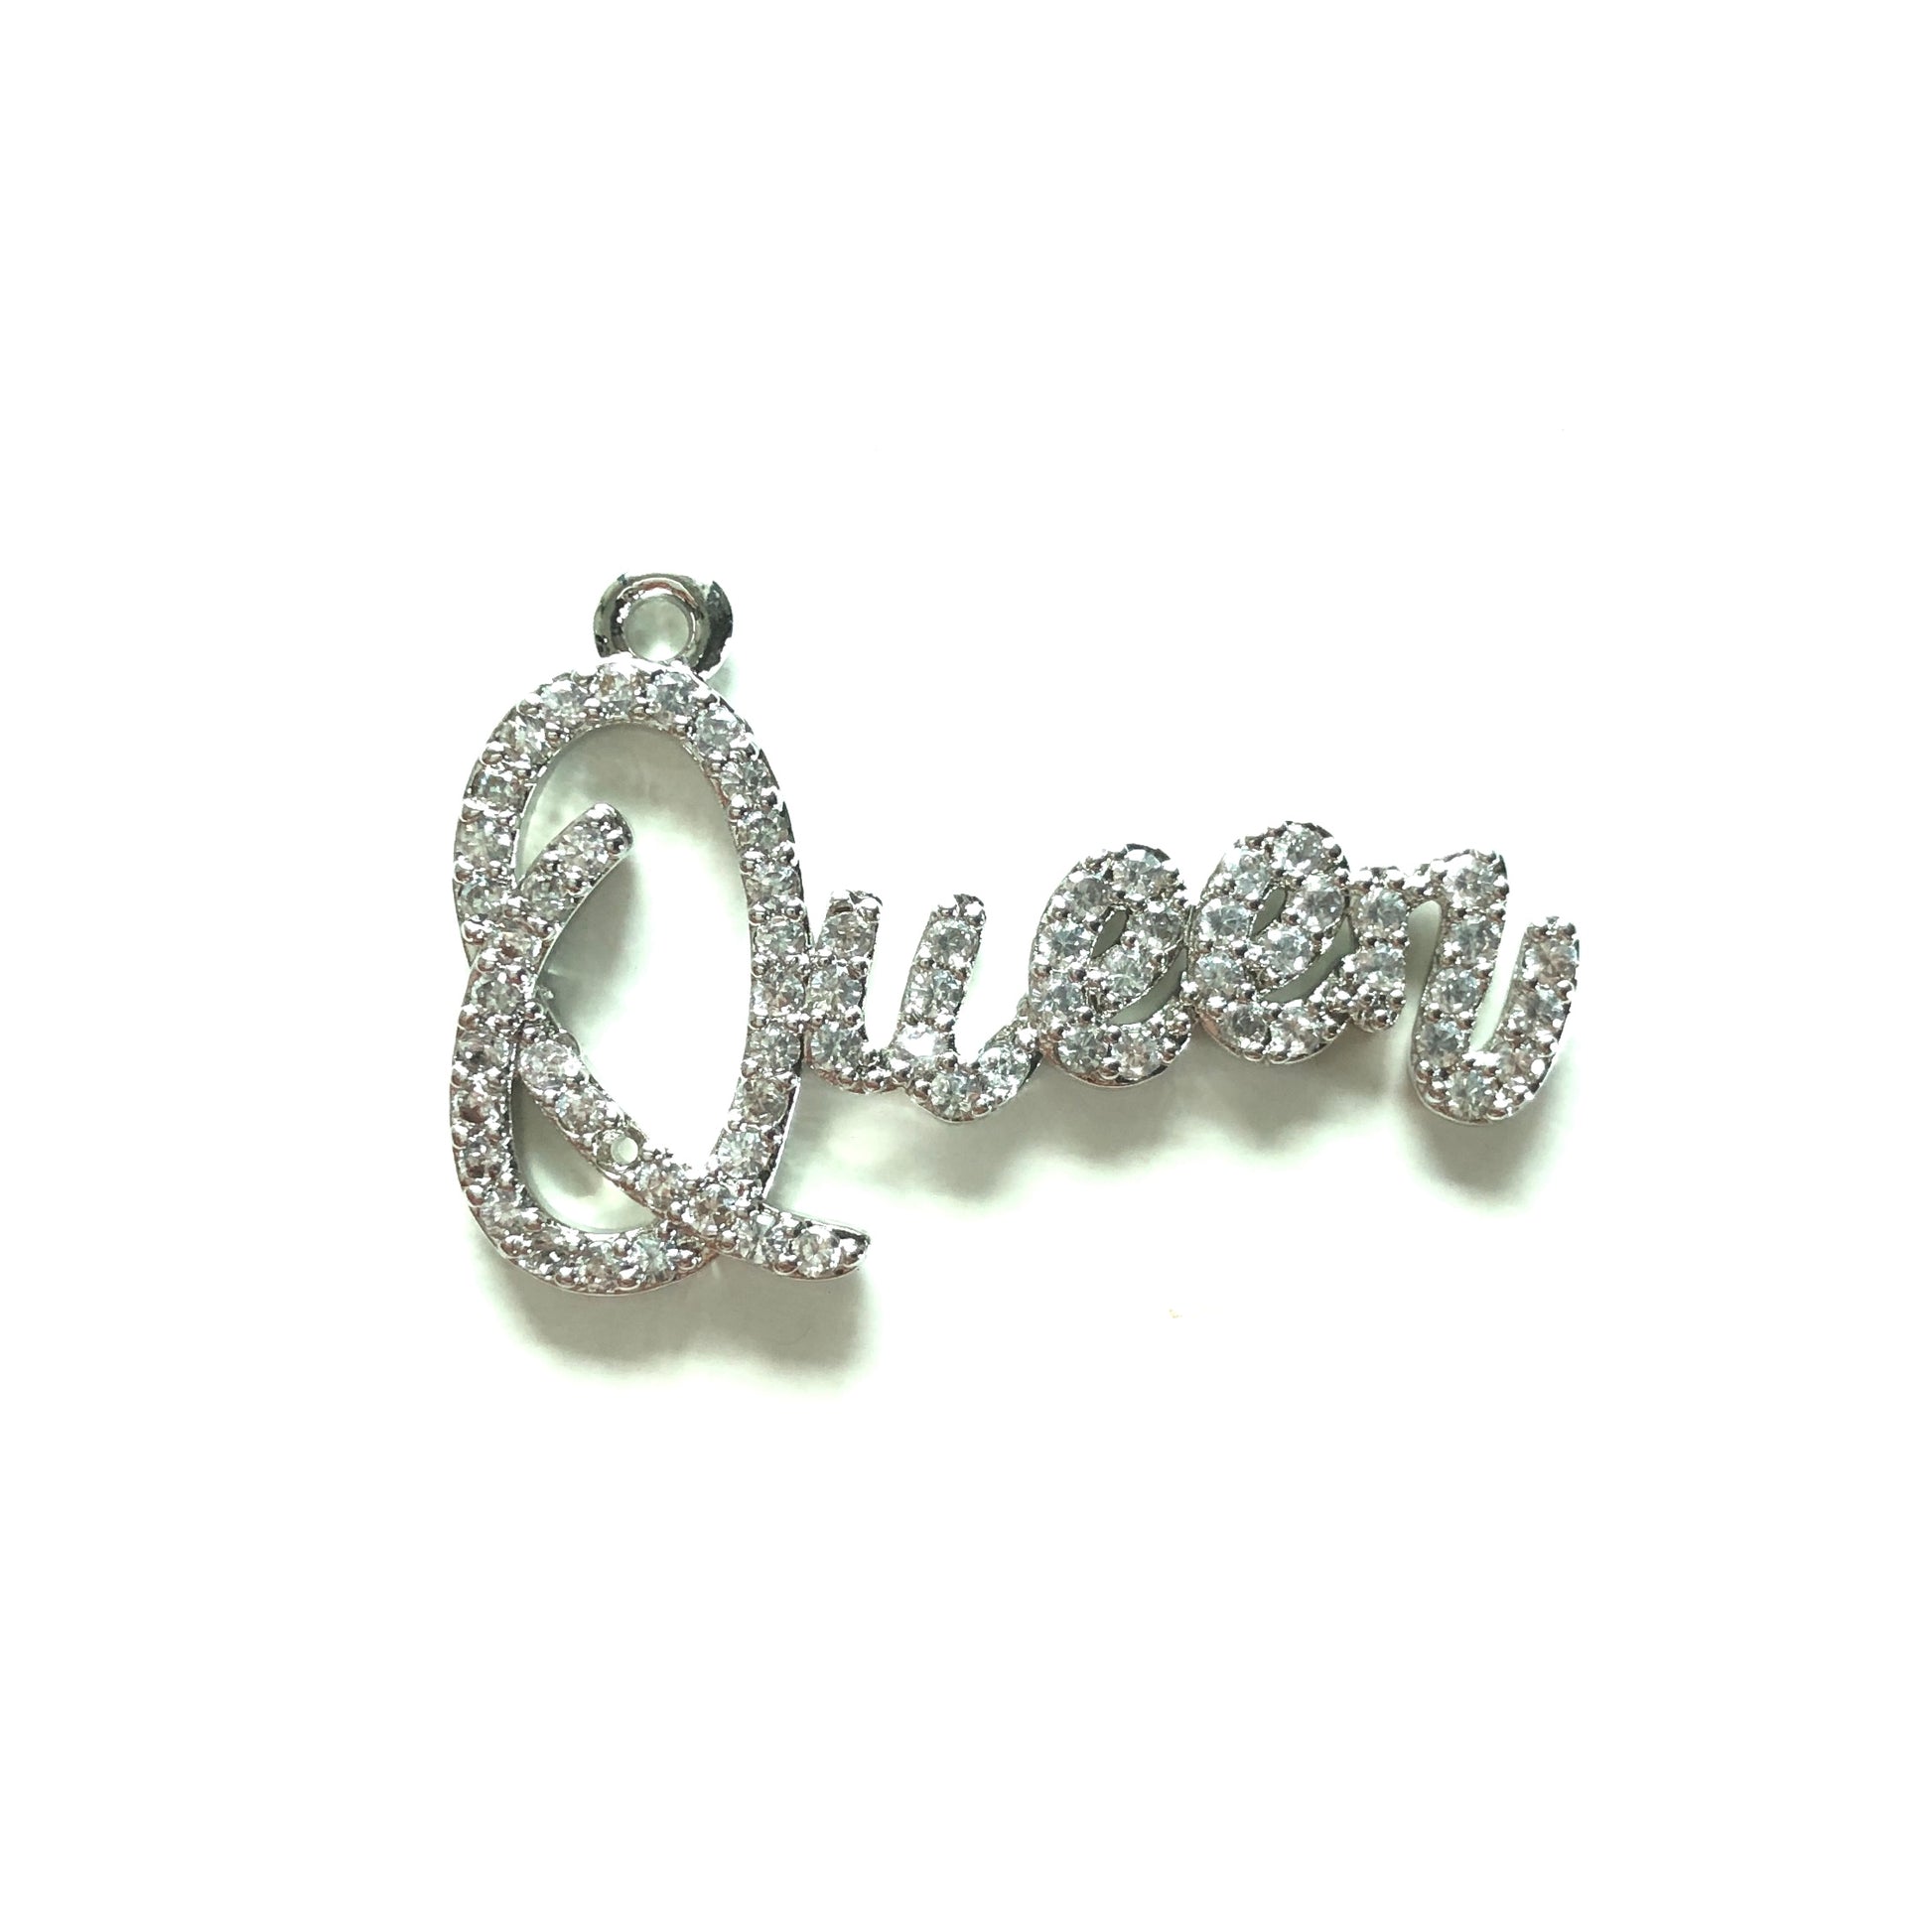 10pcs/lot 34*22.5mm CZ Paved Queen Charms Silver CZ Paved Charms Queen Charms Words & Quotes Charms Beads Beyond